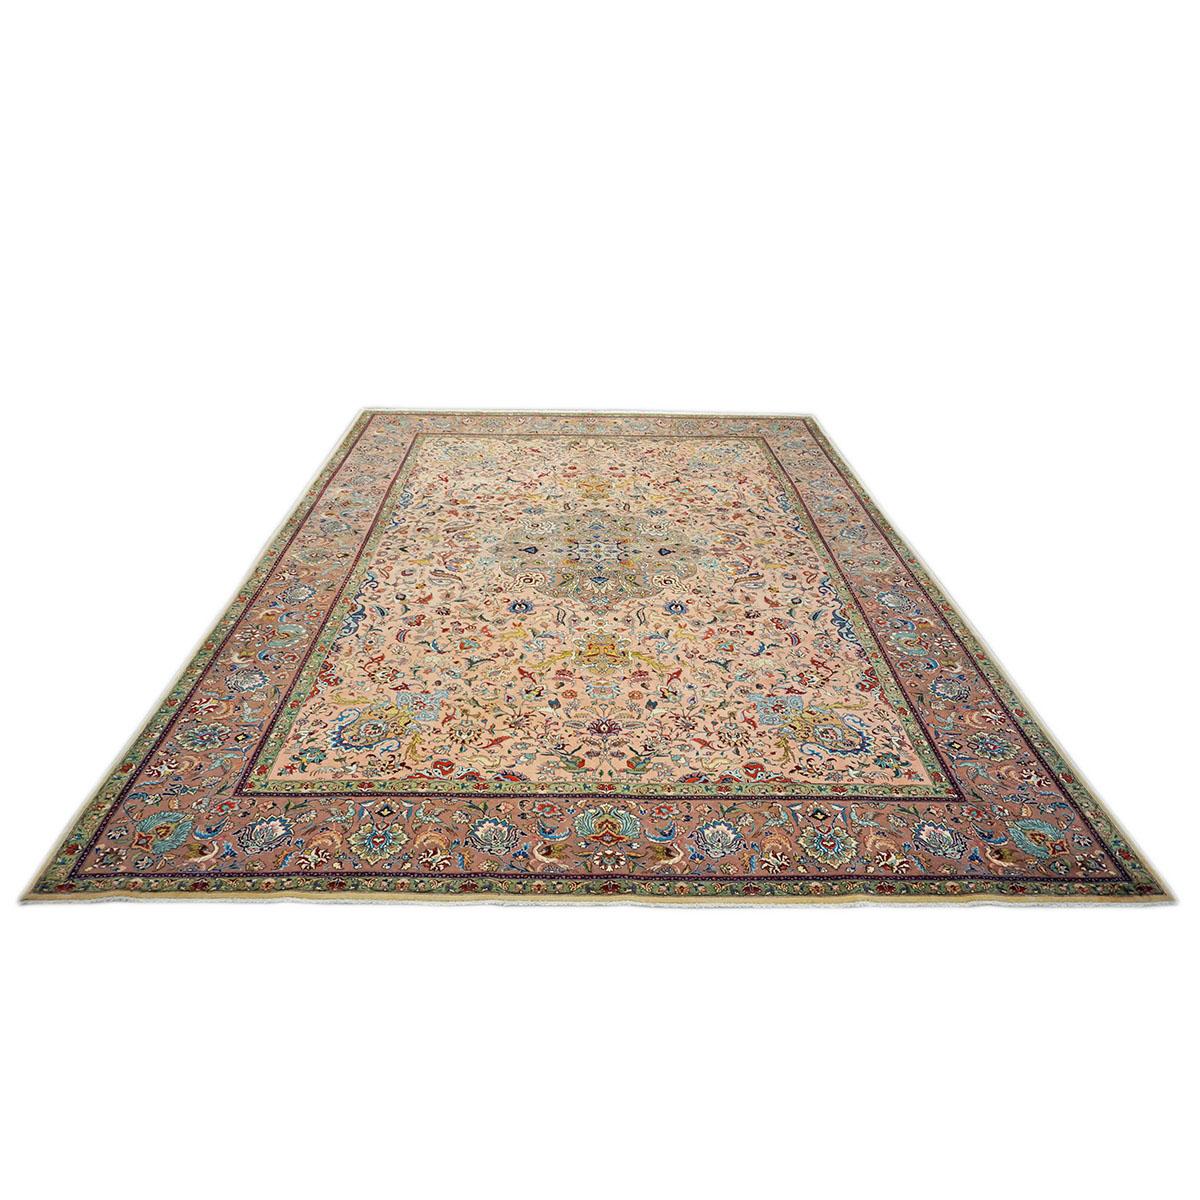  Ashly Fine Rugs presents a 1930s Antique Persian Tabriz 9x13 Wool Handmade Rug. Tabriz is a northern city in modern-day Iran and has forever been famous for the fineness and craftsmanship of its handmade rugs. These rugs are better known as the